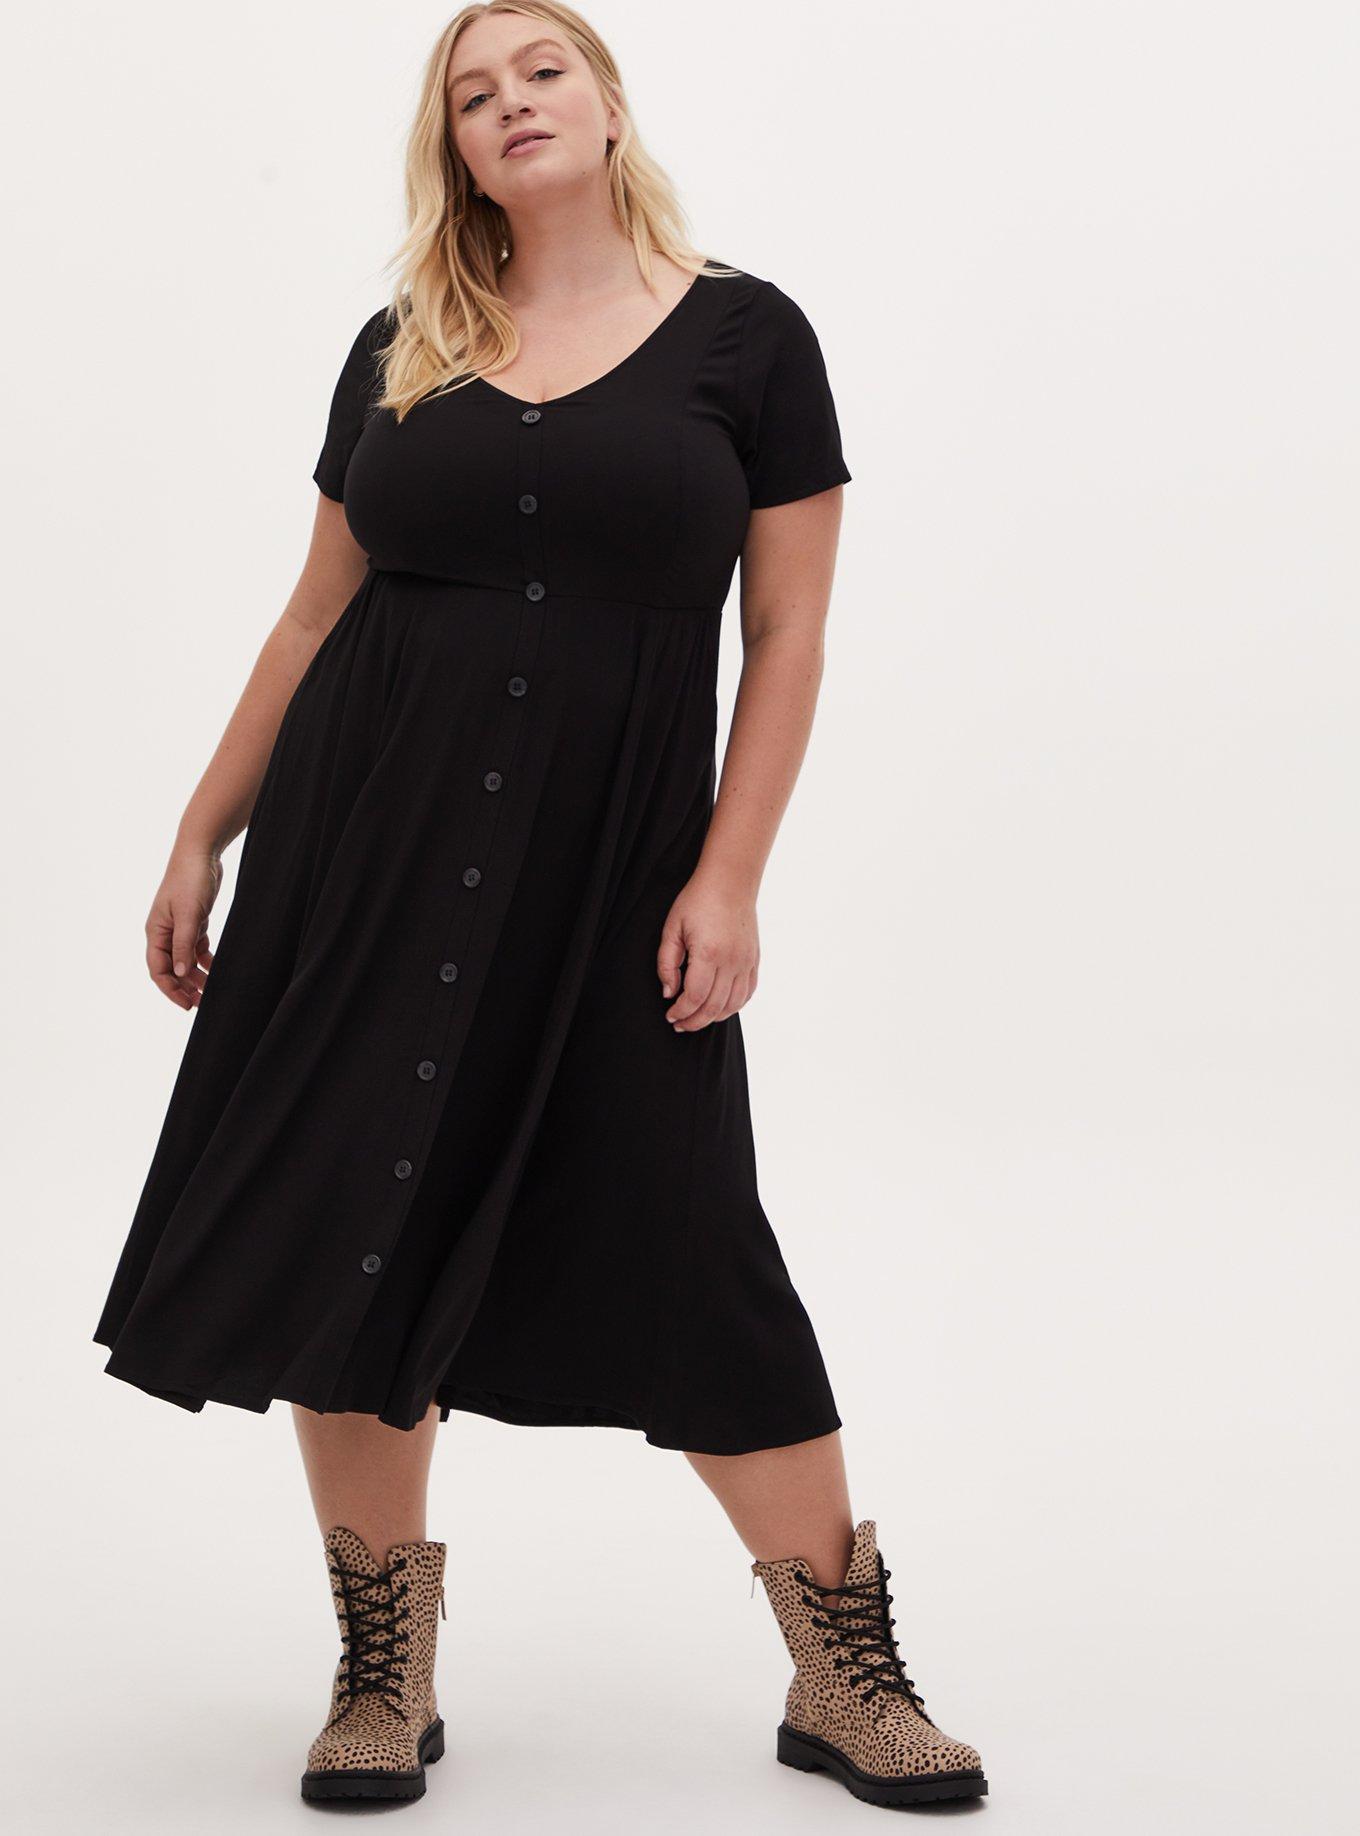 Sassy Long-Sleeve Dress Under $60 for Fall in Vermont